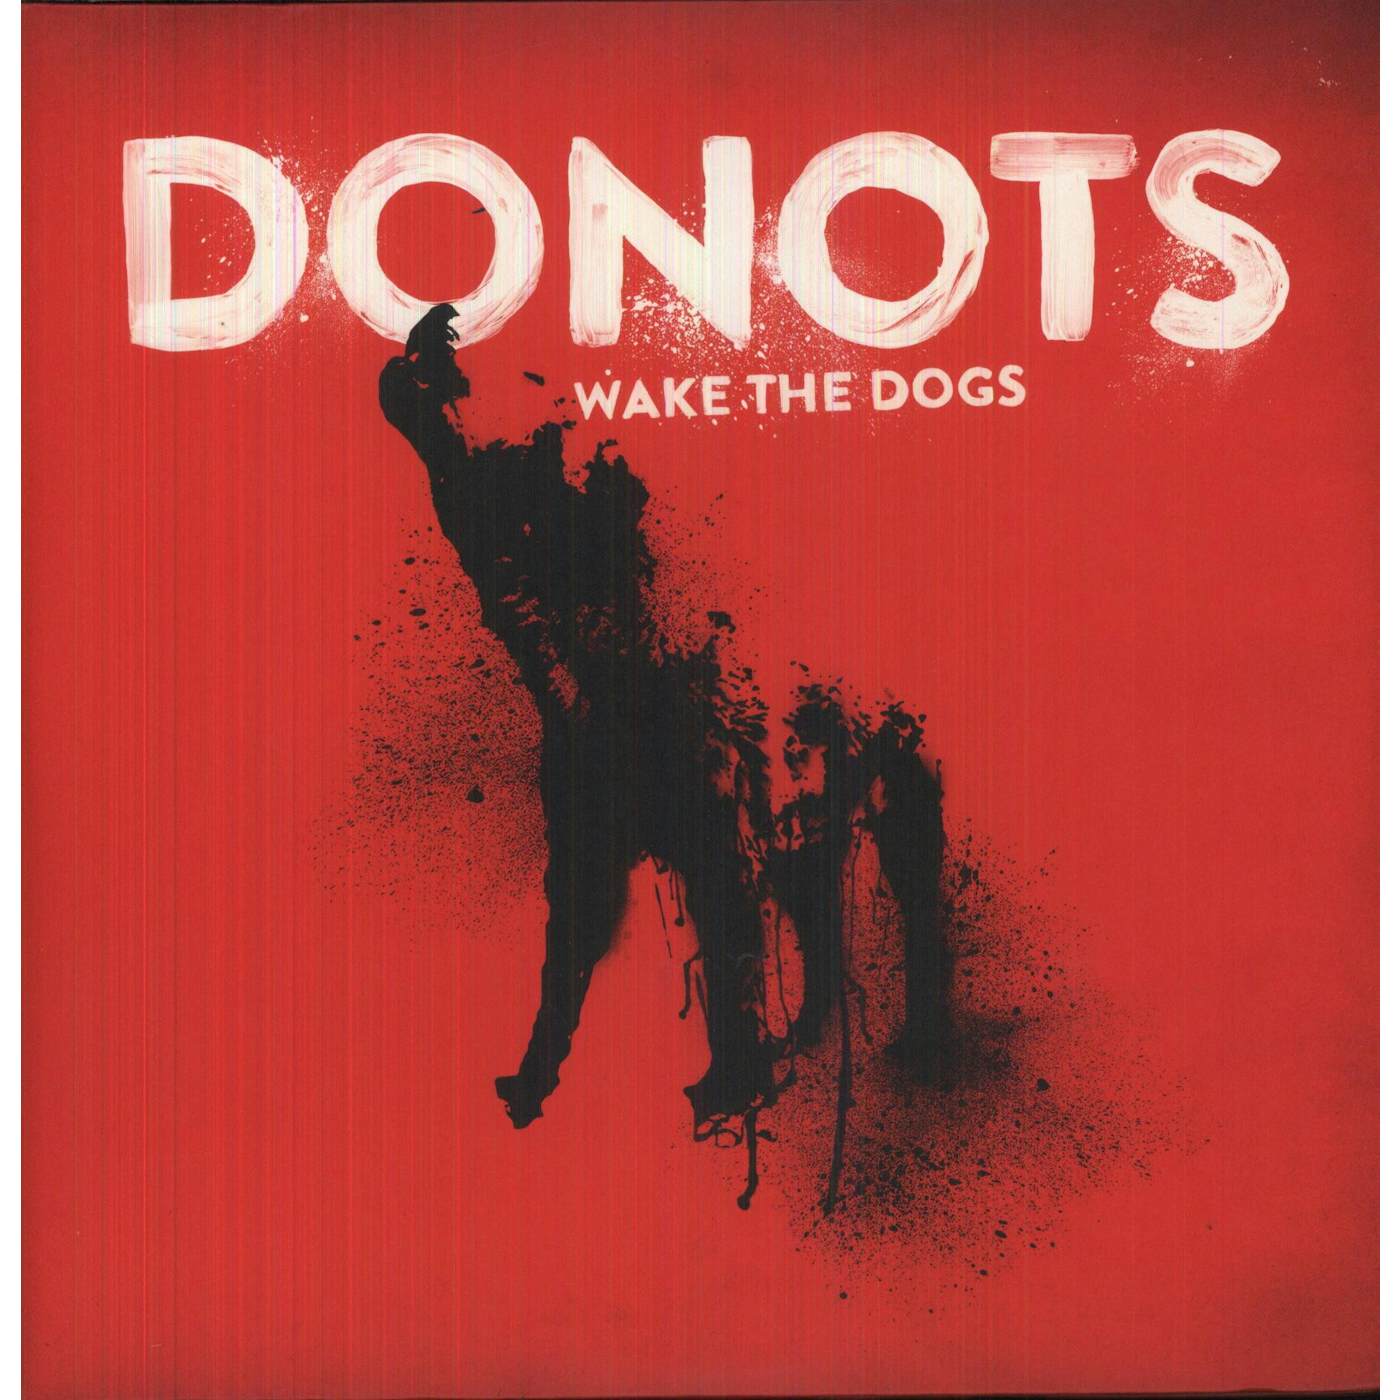 Donots Wake The Dogs Vinyl Record